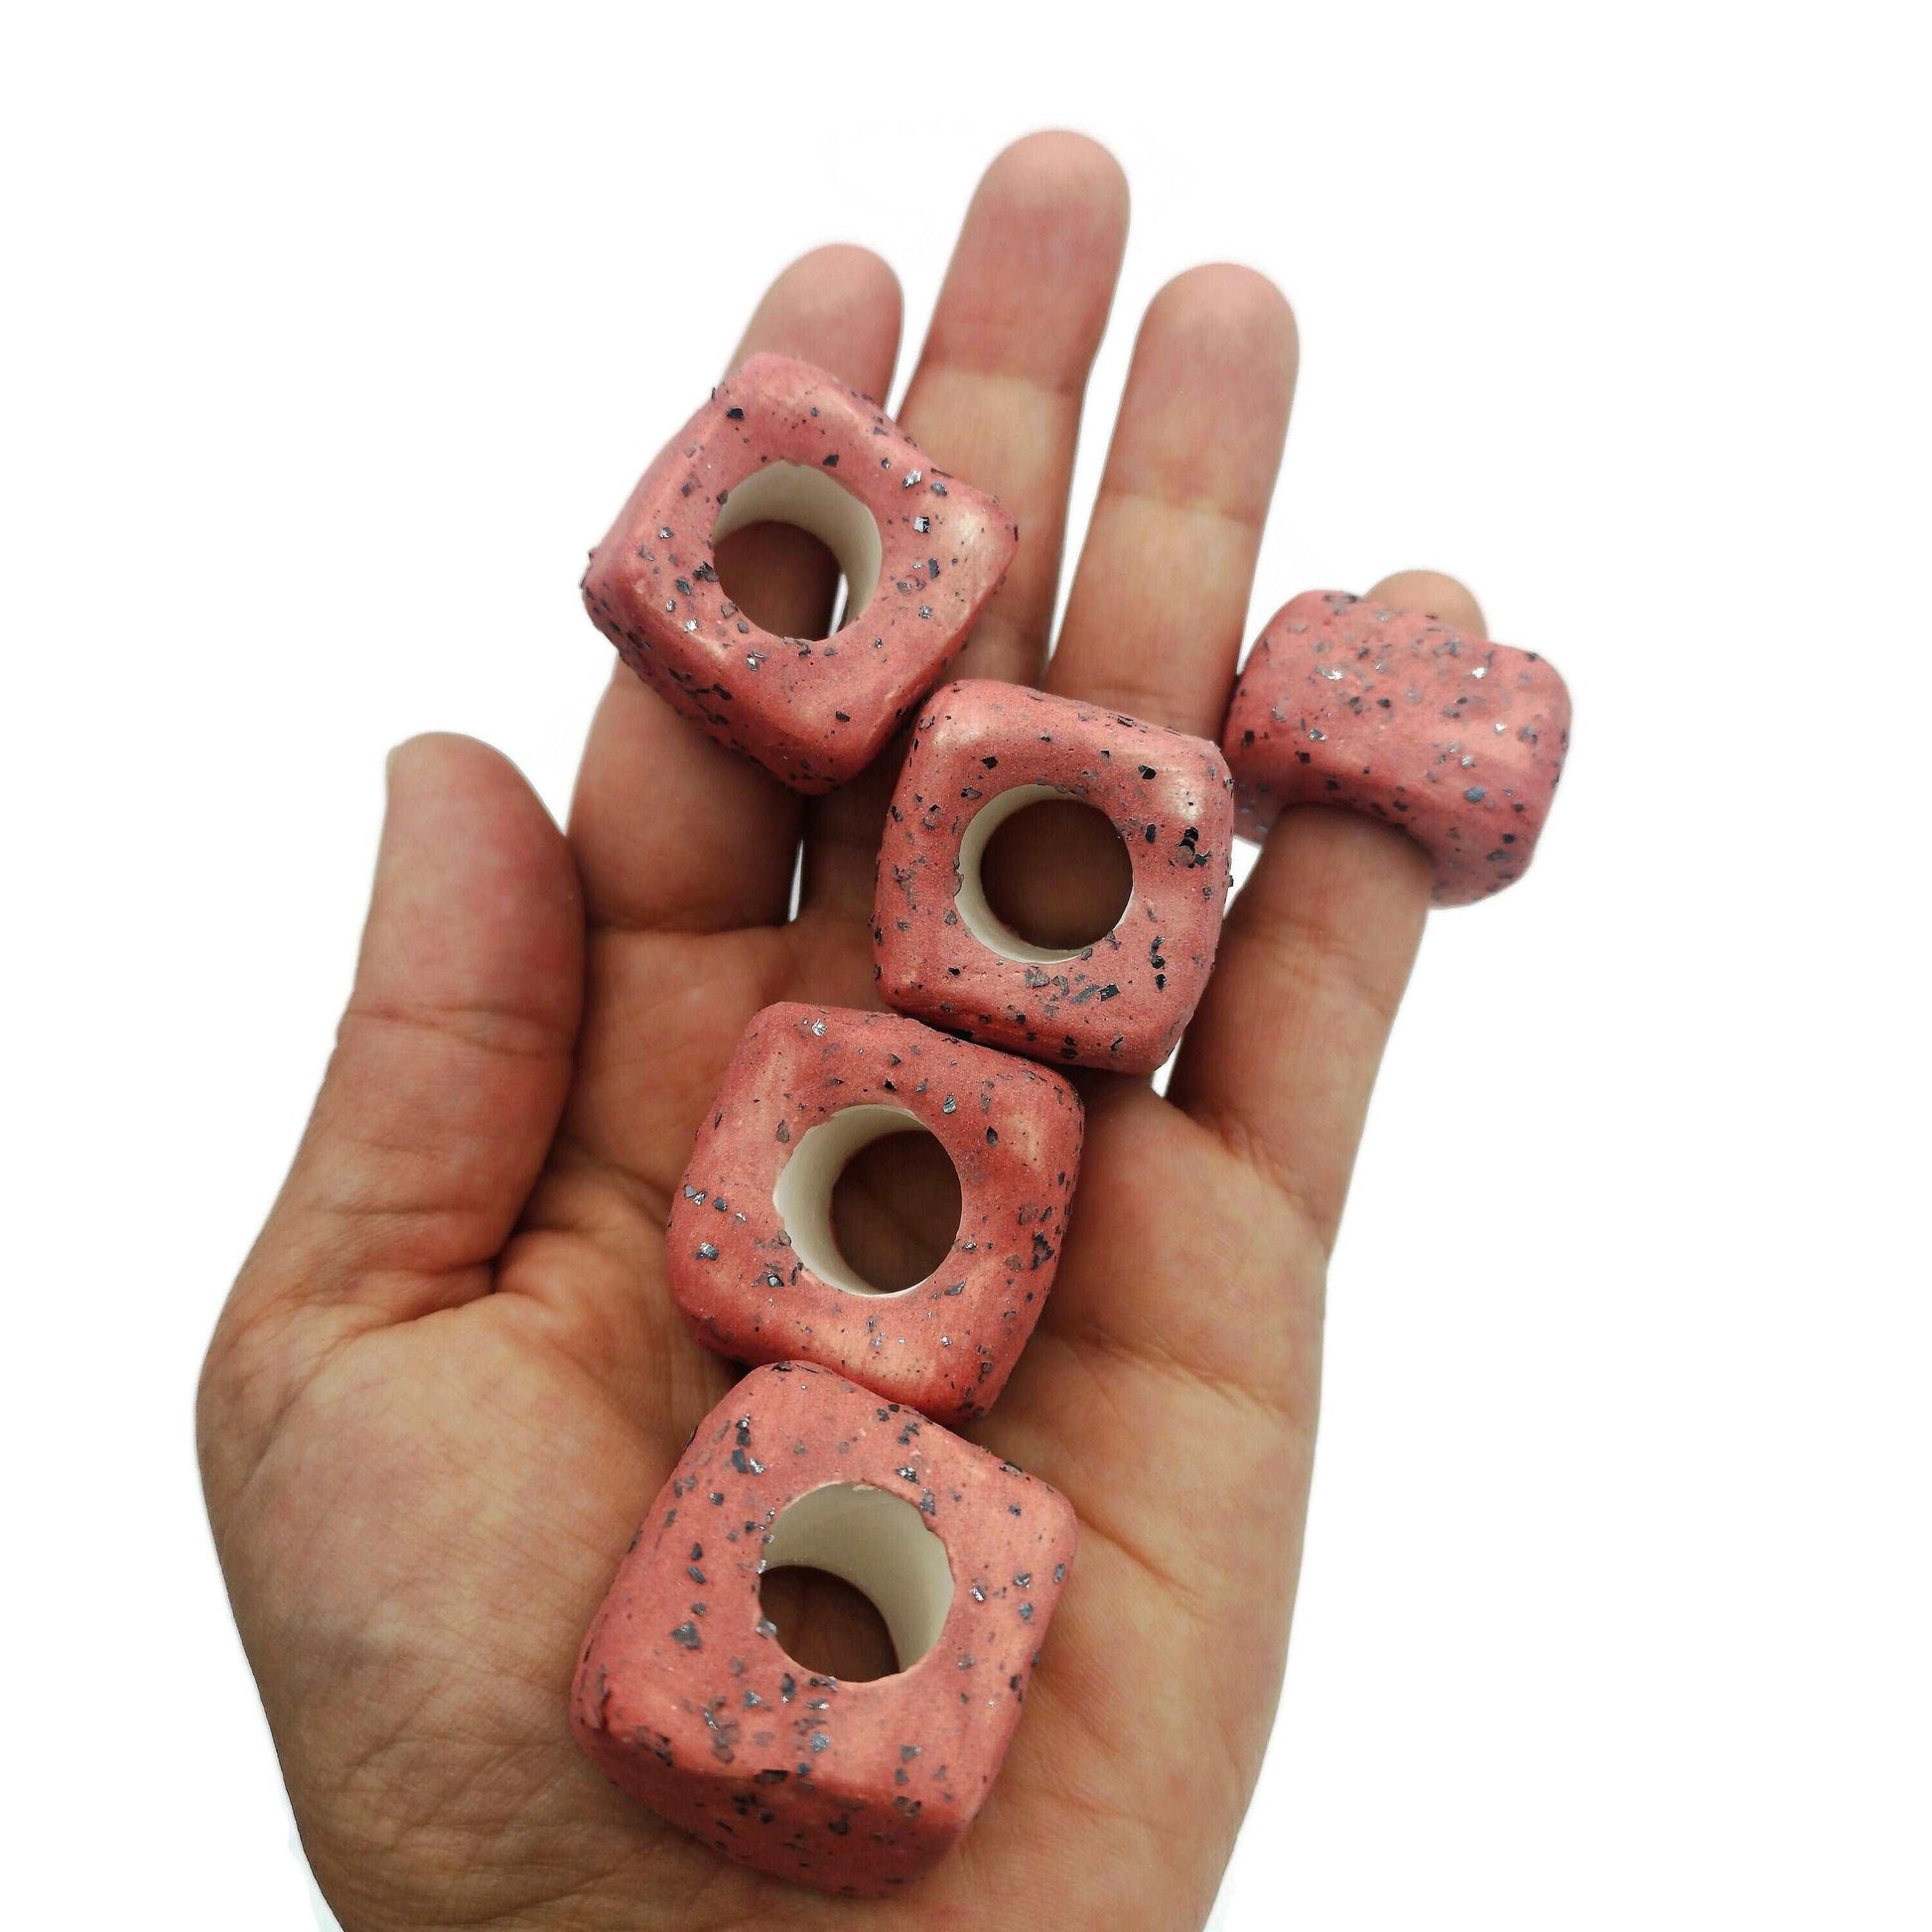 1Pc 25mm Extra Large Handmade Ceramic Beads For Macrame With Large Hole, Square Unique Chunky Clay Beads for Jewelry Making Sparkly Red Bead